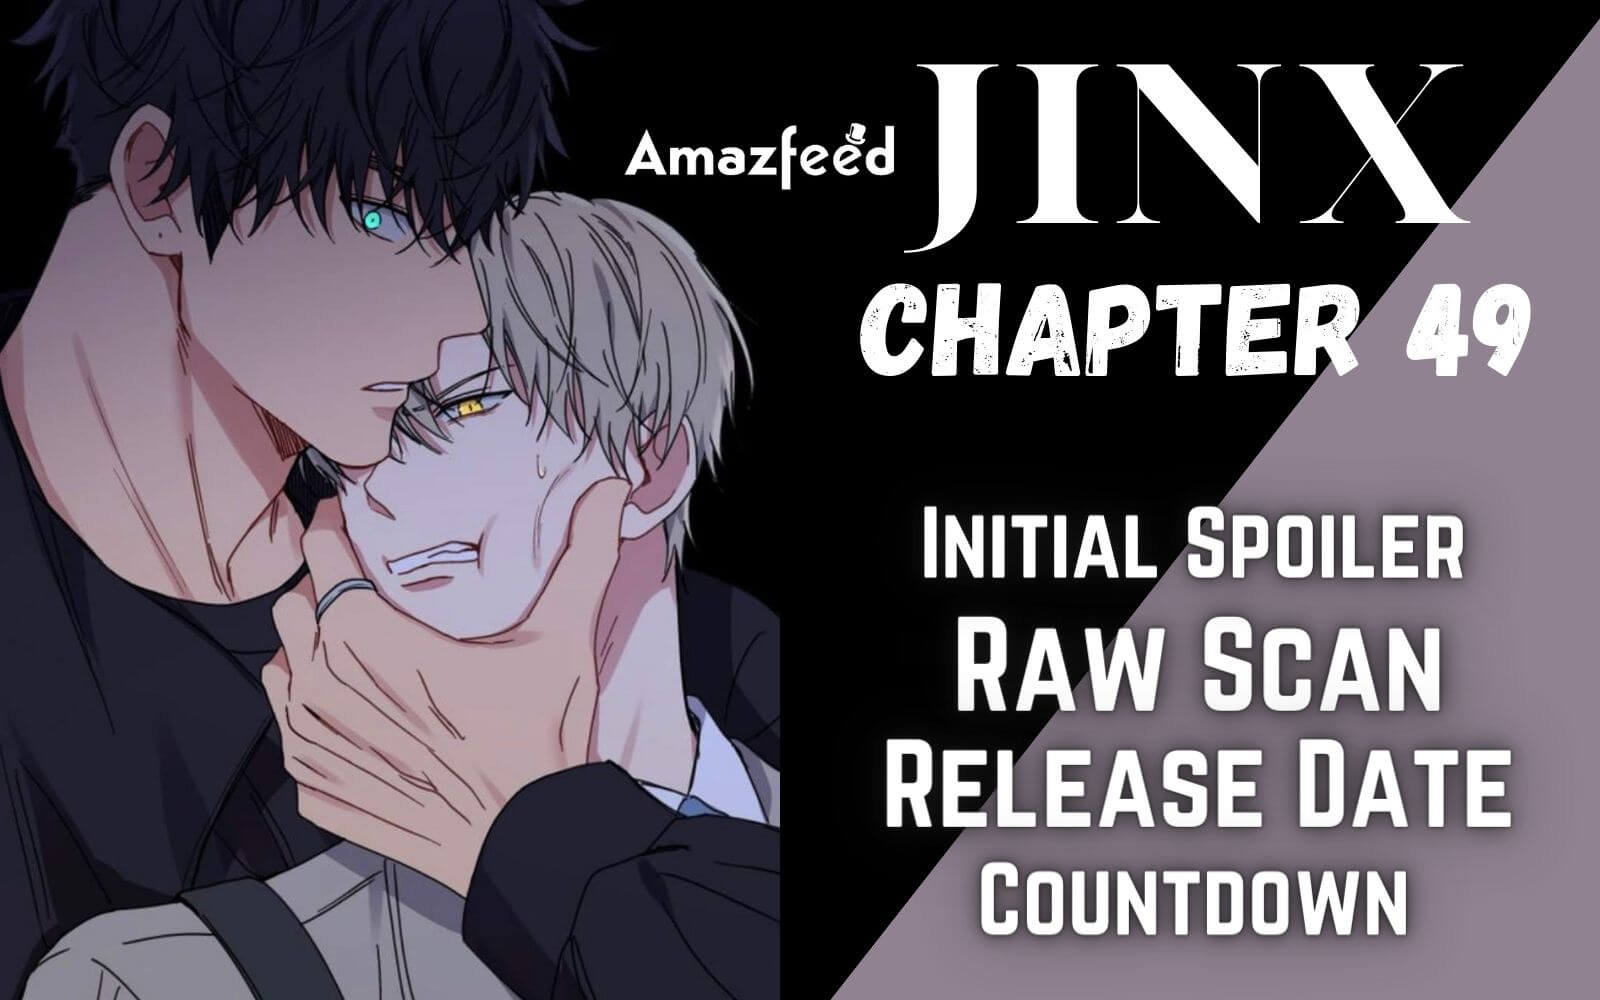 Jinx Chapter 49 Raw Scan, Spoiler, Release Date & Everything You Need To Know